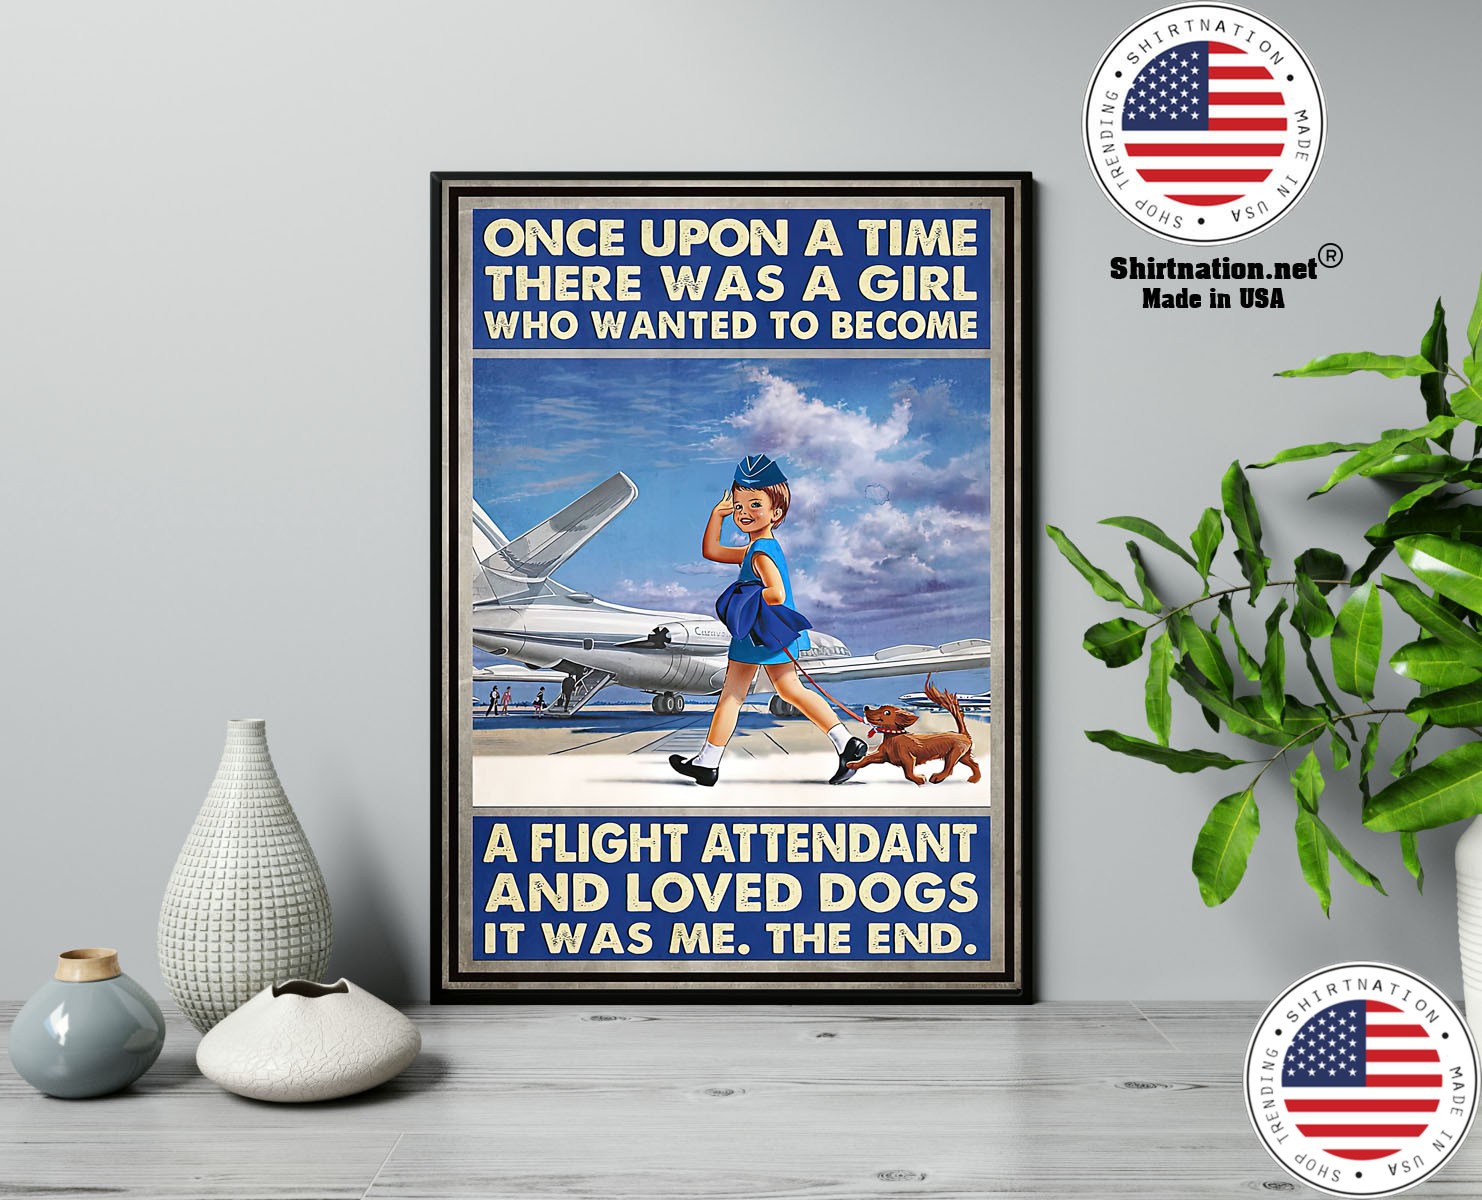 Once upon a time there was a girl who wanted to become a flight attendant and loved dogs poster 13